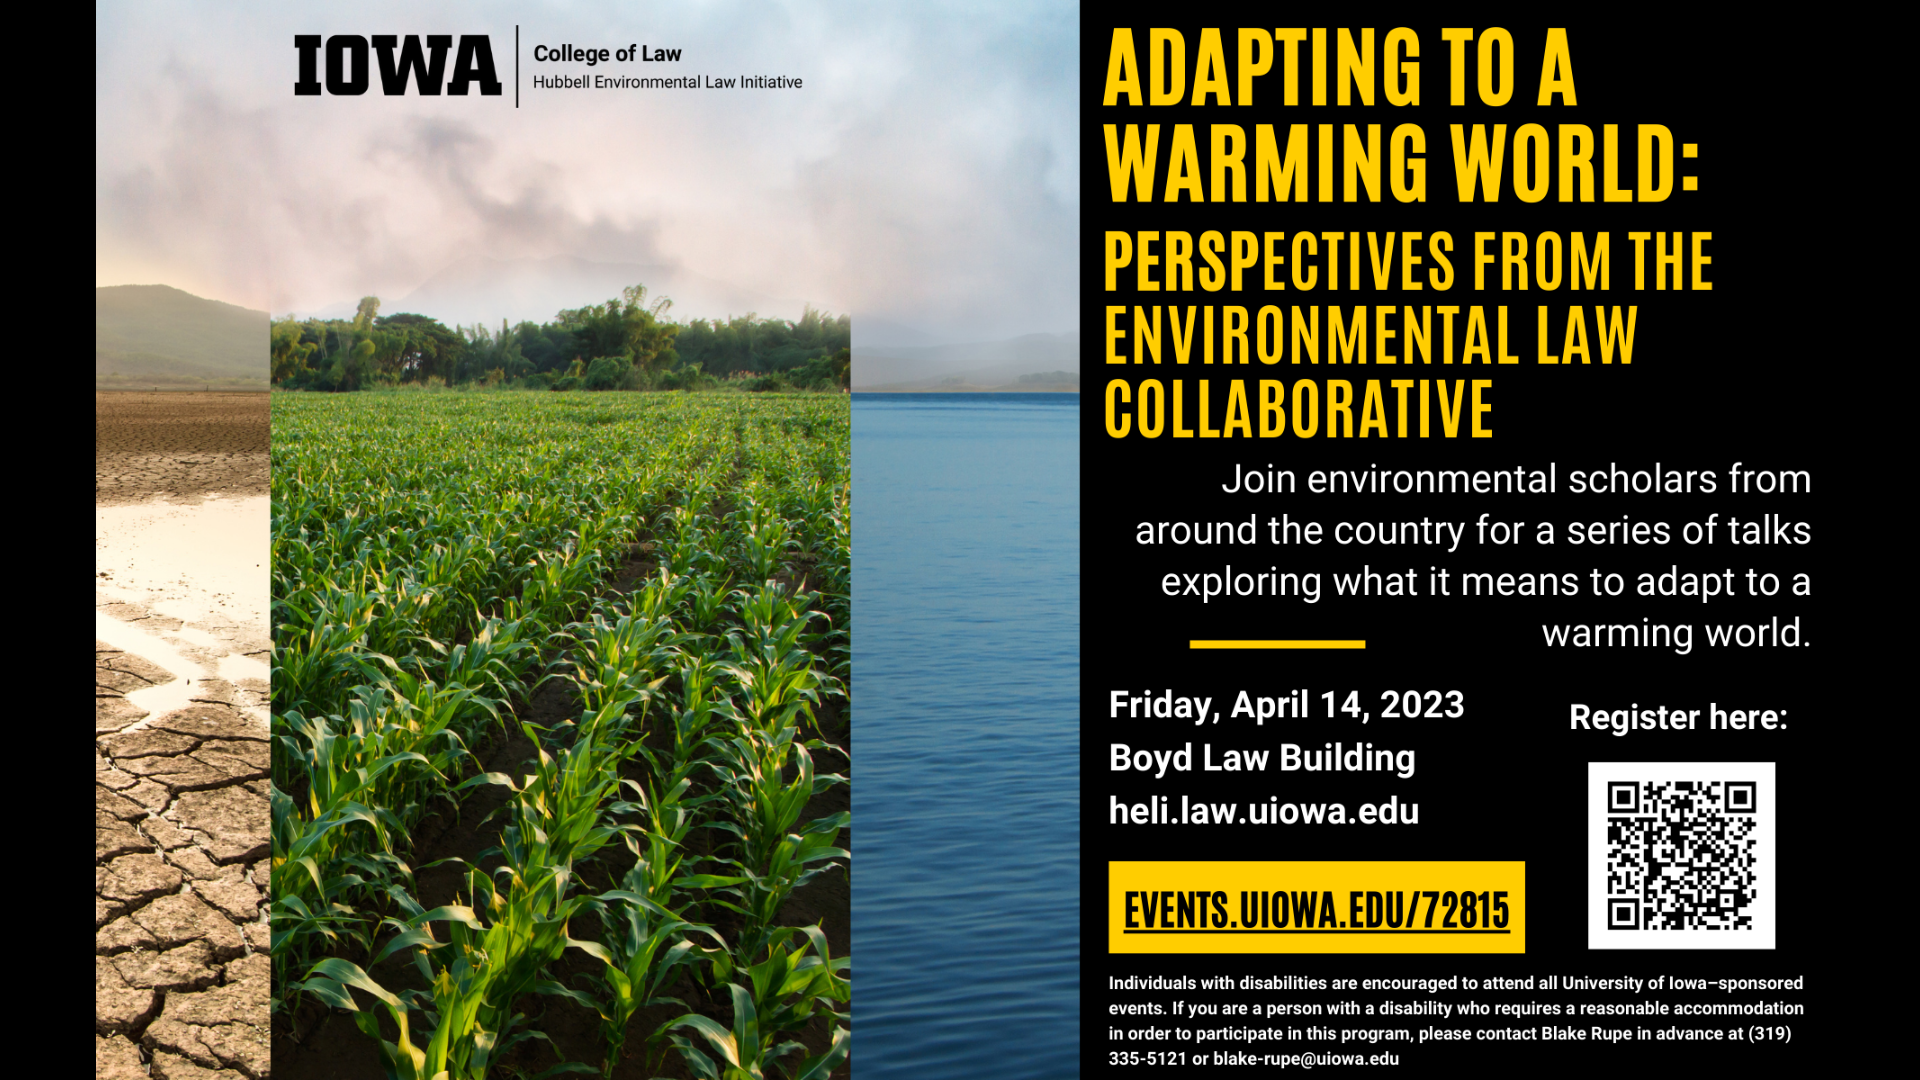 Adapting to a Warming World: Perspectives from the Environmental Law Collaborative. Join environmental scholars from around the country for a series of talks exploring what it means to adapt to a warming world. Friday, April 14, 2023. Boyd Law Building. heli.law.uiowa.edu. events.uiowa.edu/72815. 